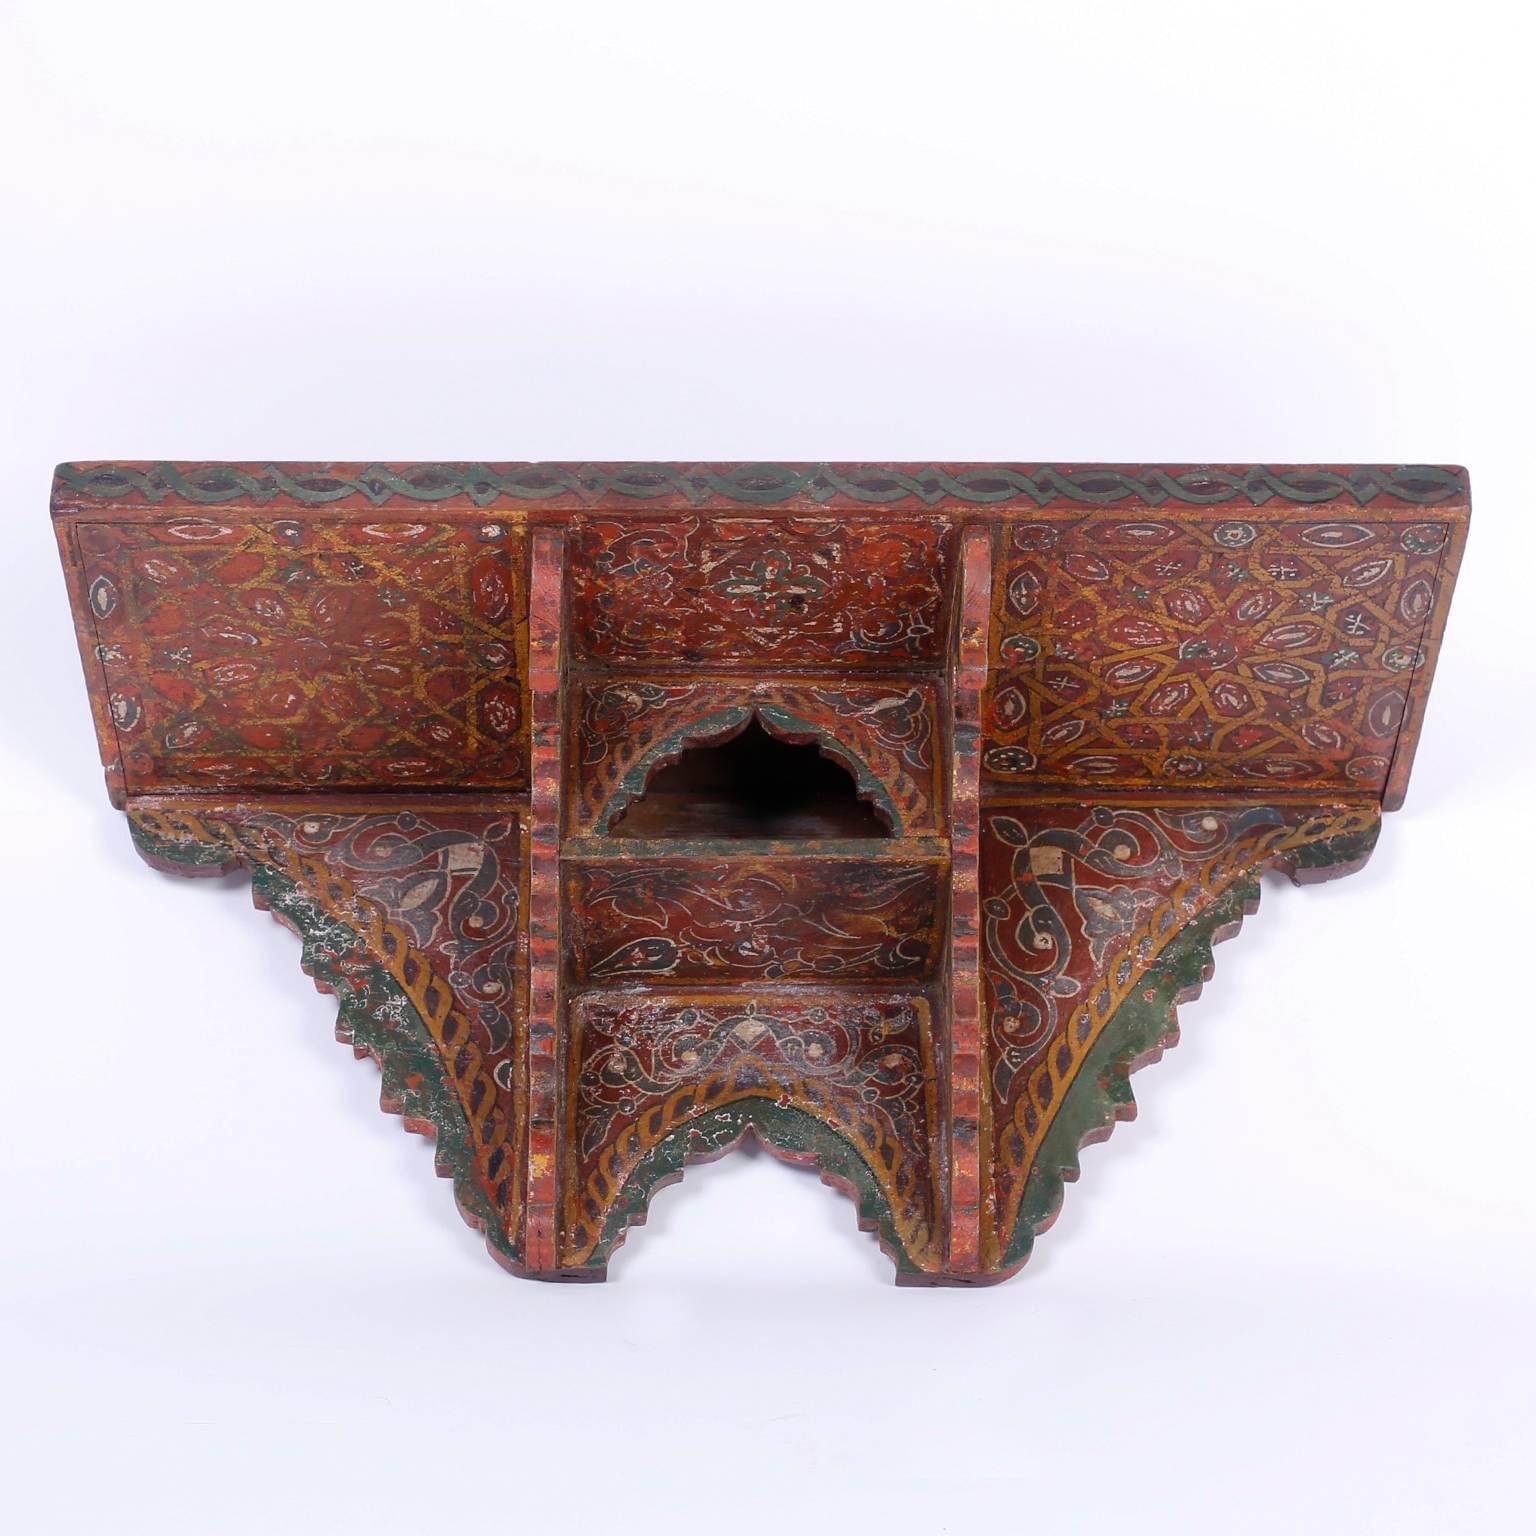 Moroccan wall shelf or British Colonial wall bracket with a gallery around the plateau and an open compartment between two scalloped supports. Painted with traditional folky, rustic colors in symbolic floral and geometric designs.